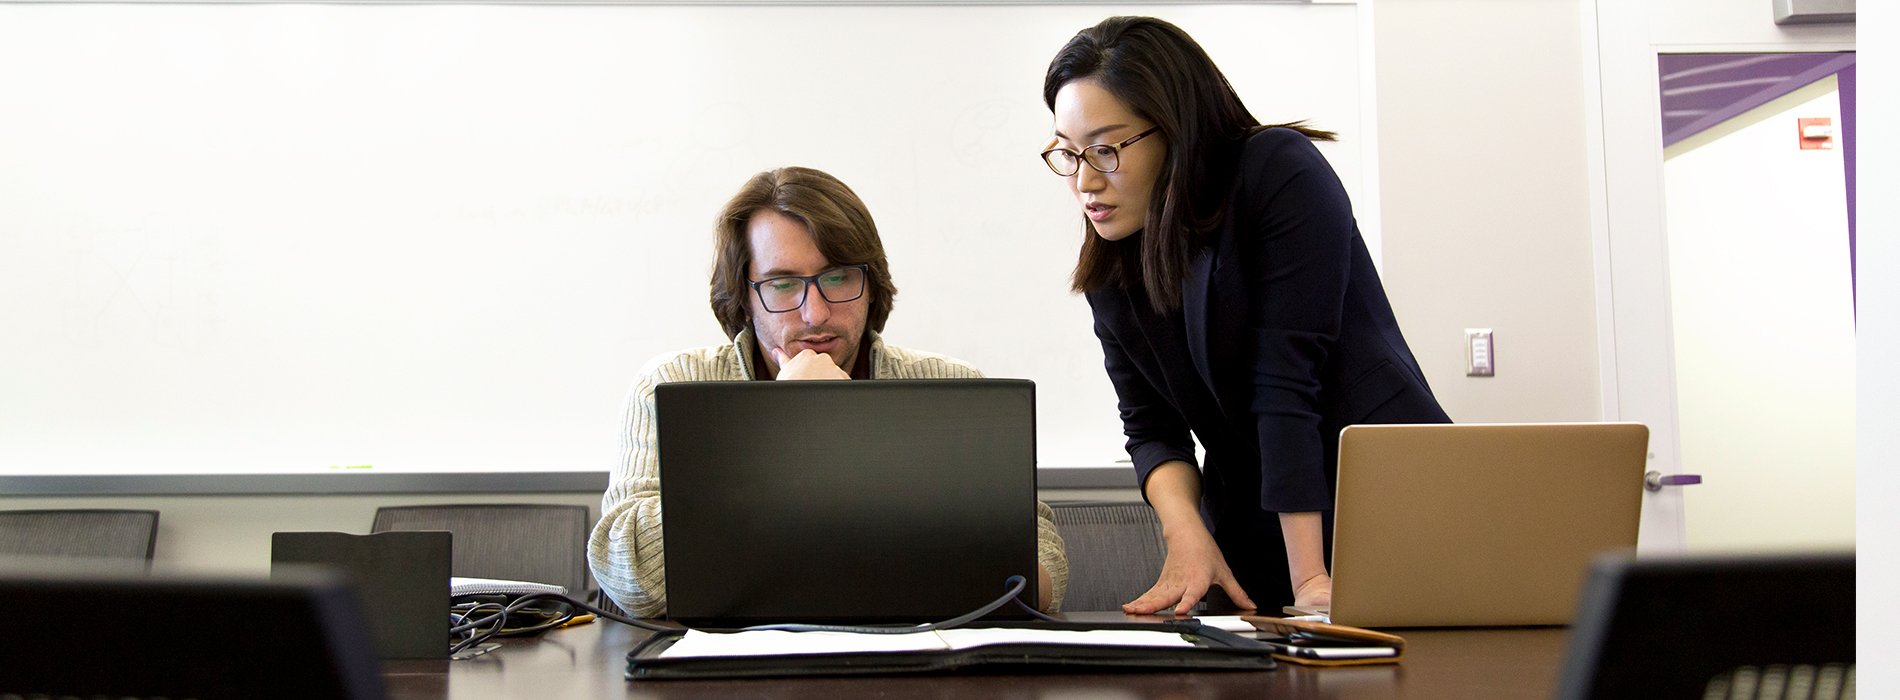 A woman in glasses and a black blazer stands a looks over the shoulder of a student in a tan sweater and glasses. Both look at a laptop on a table.